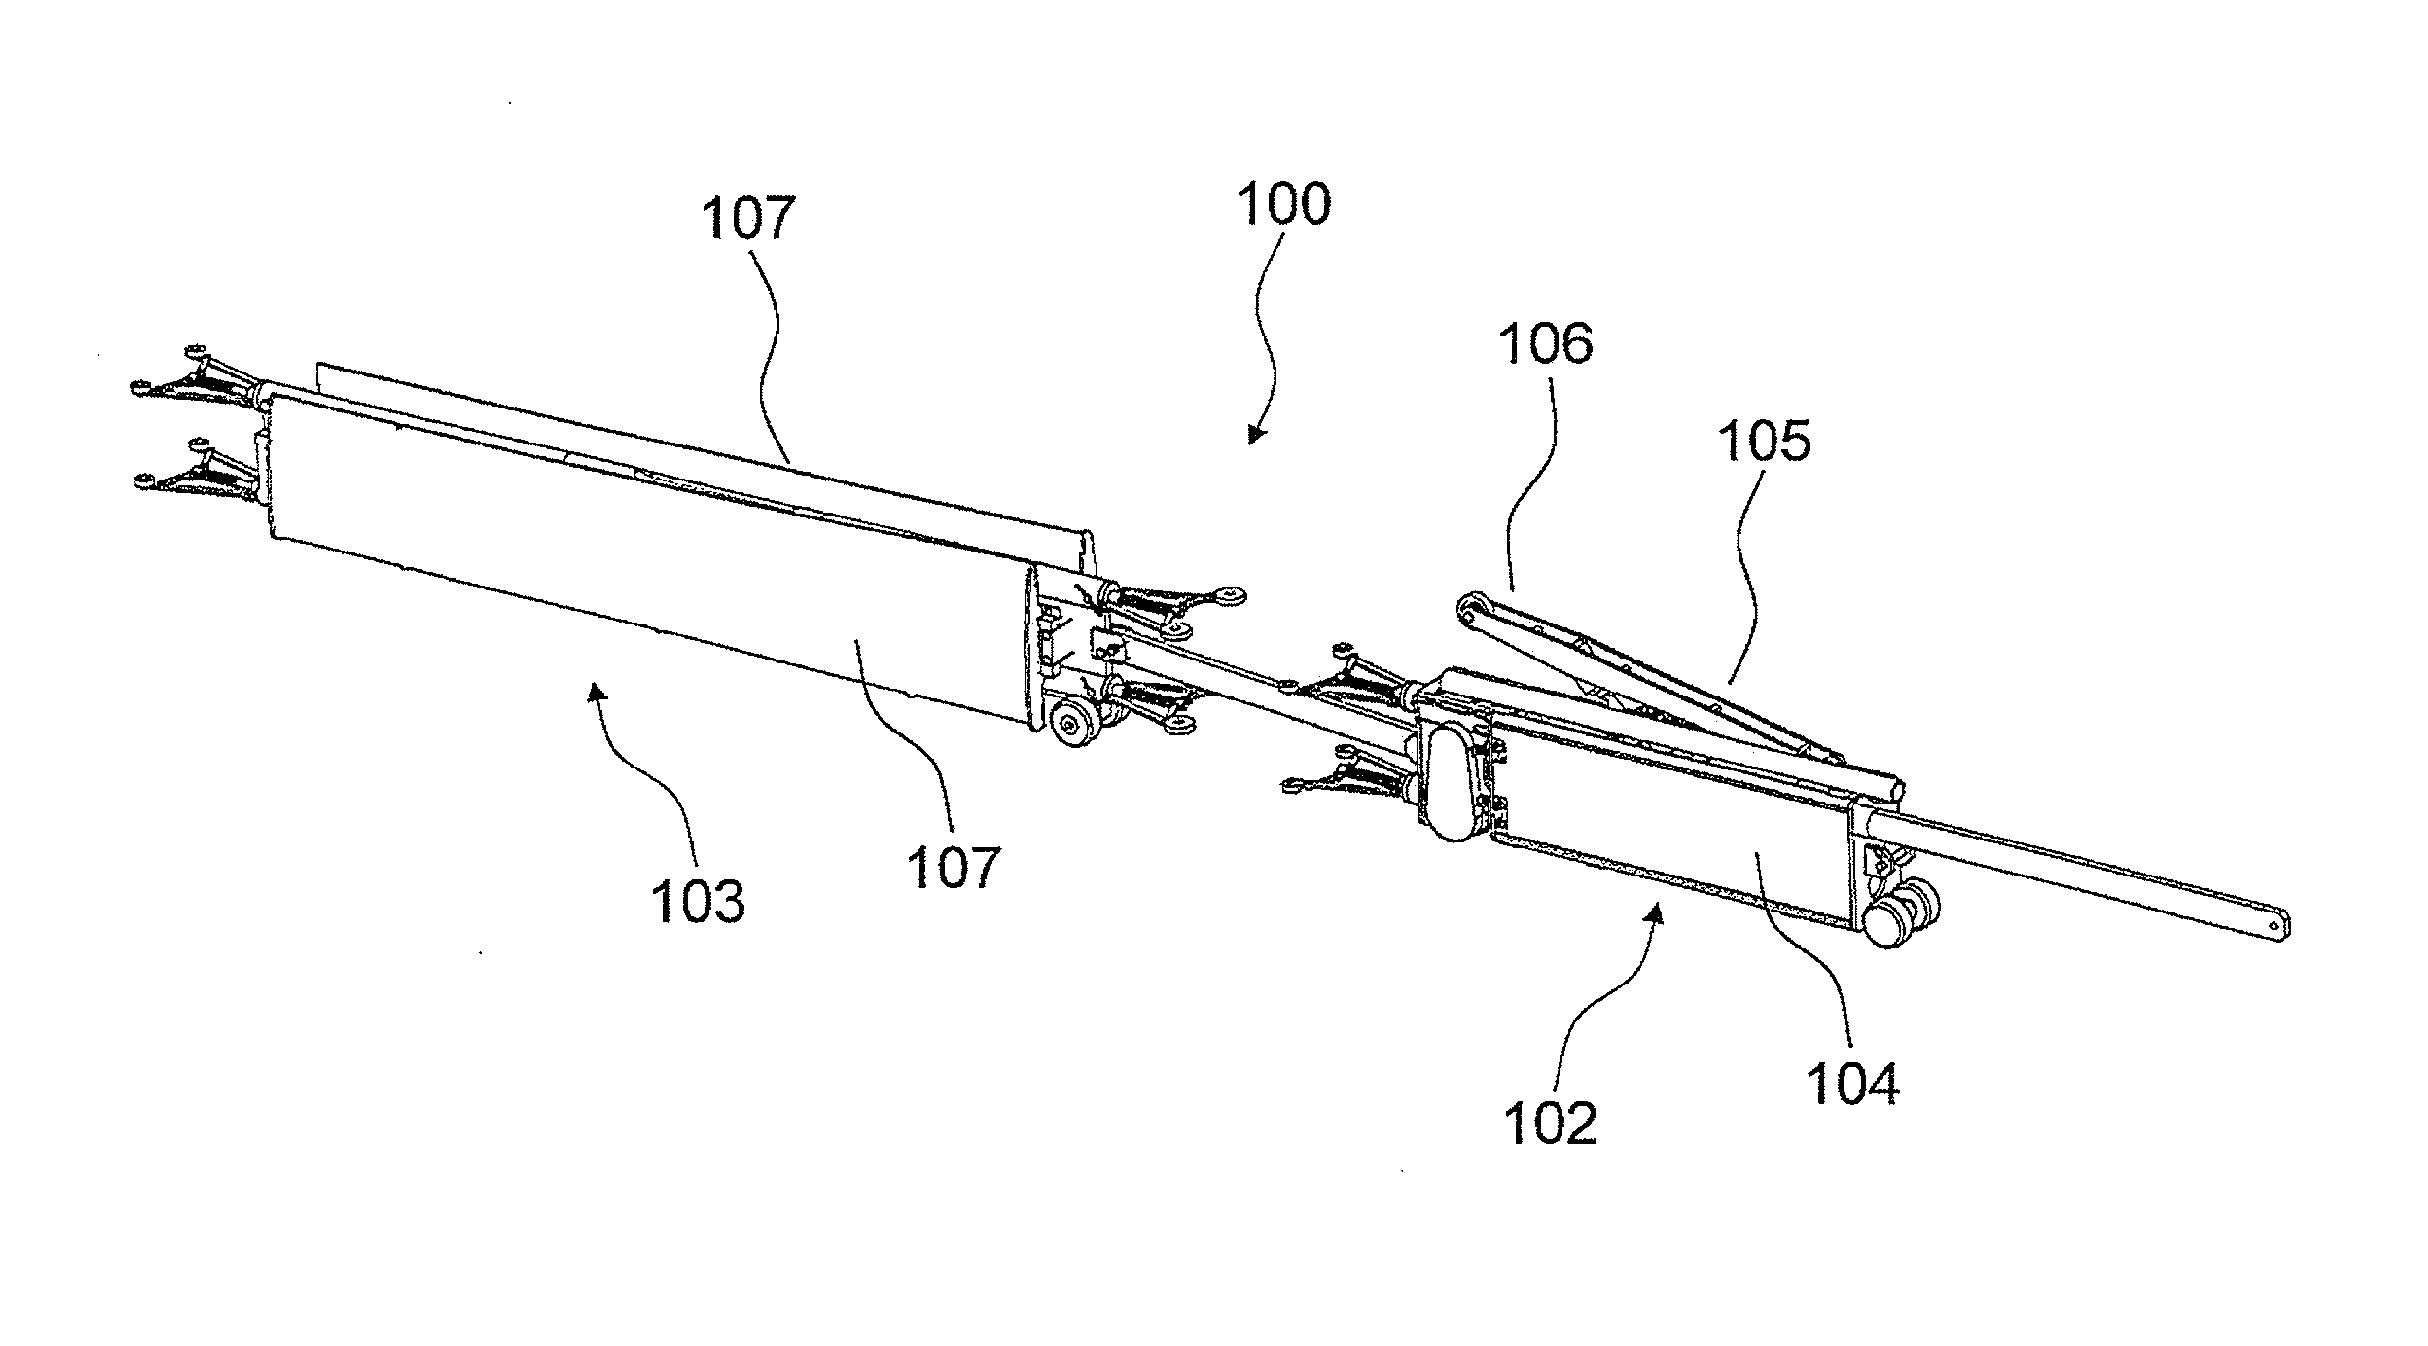 System and method for reinforcing a weakened area of a wind turbine blade